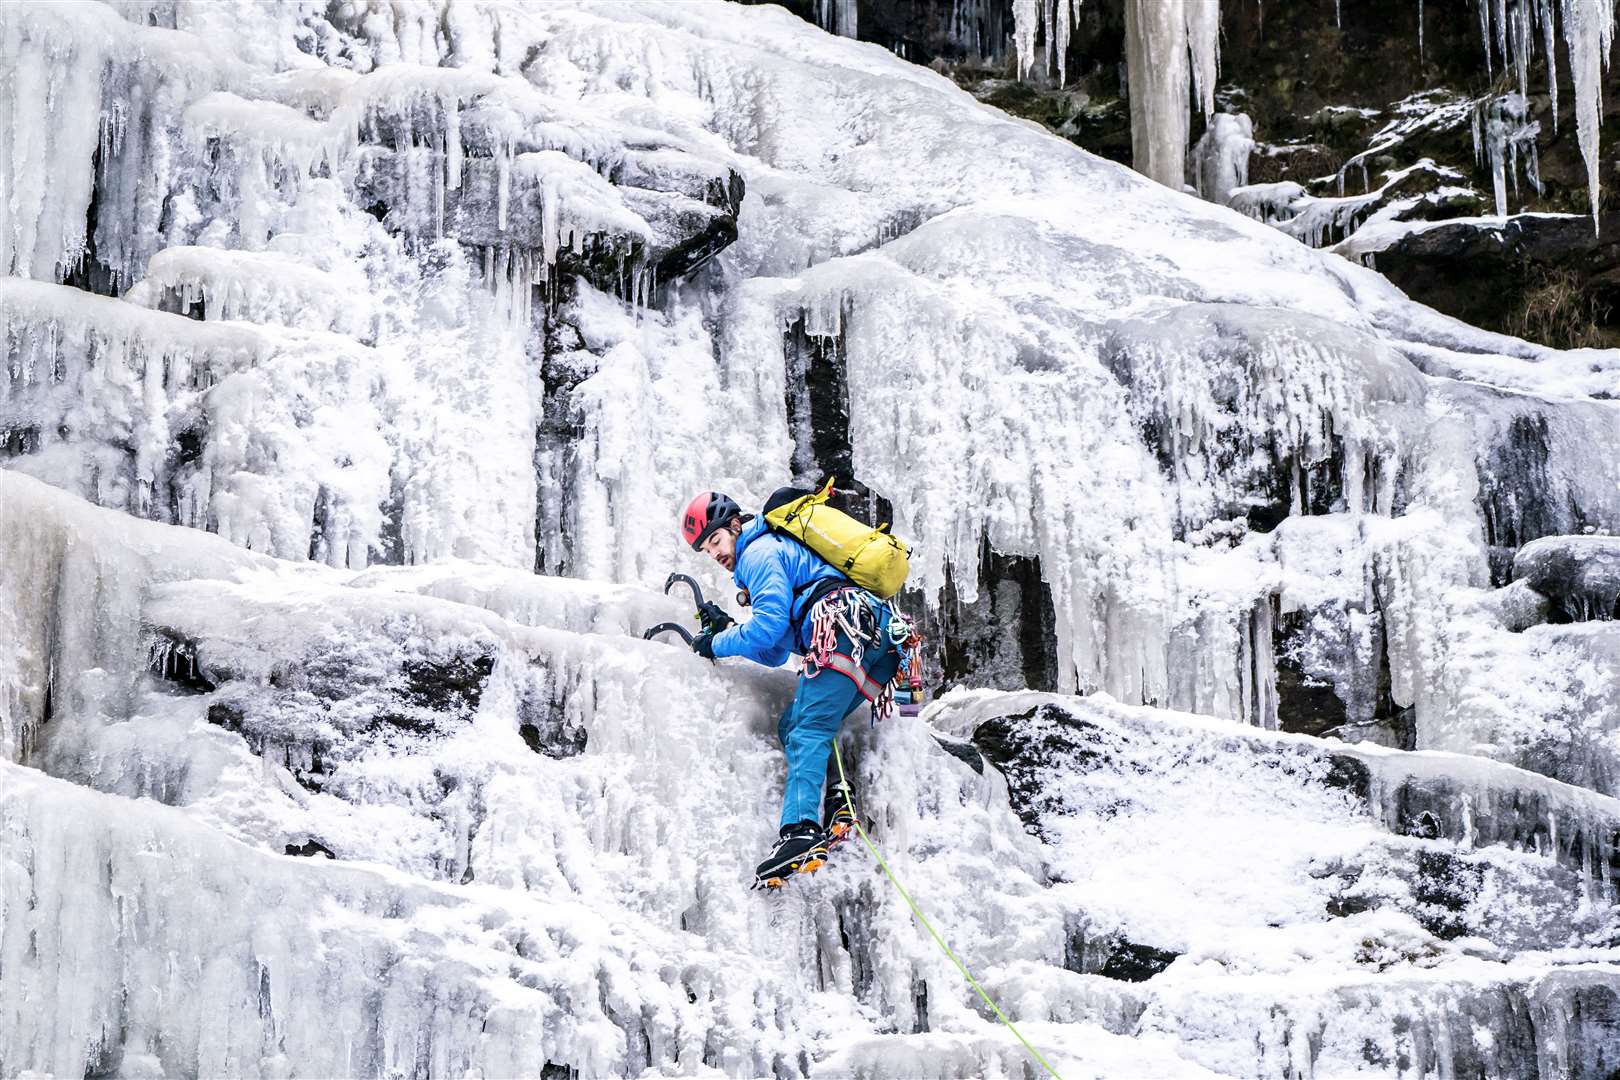 People ice climbing on the frozen Kinder Downfall, High Peak in Derbyshire on December 18 (Danny Lawson/PA)